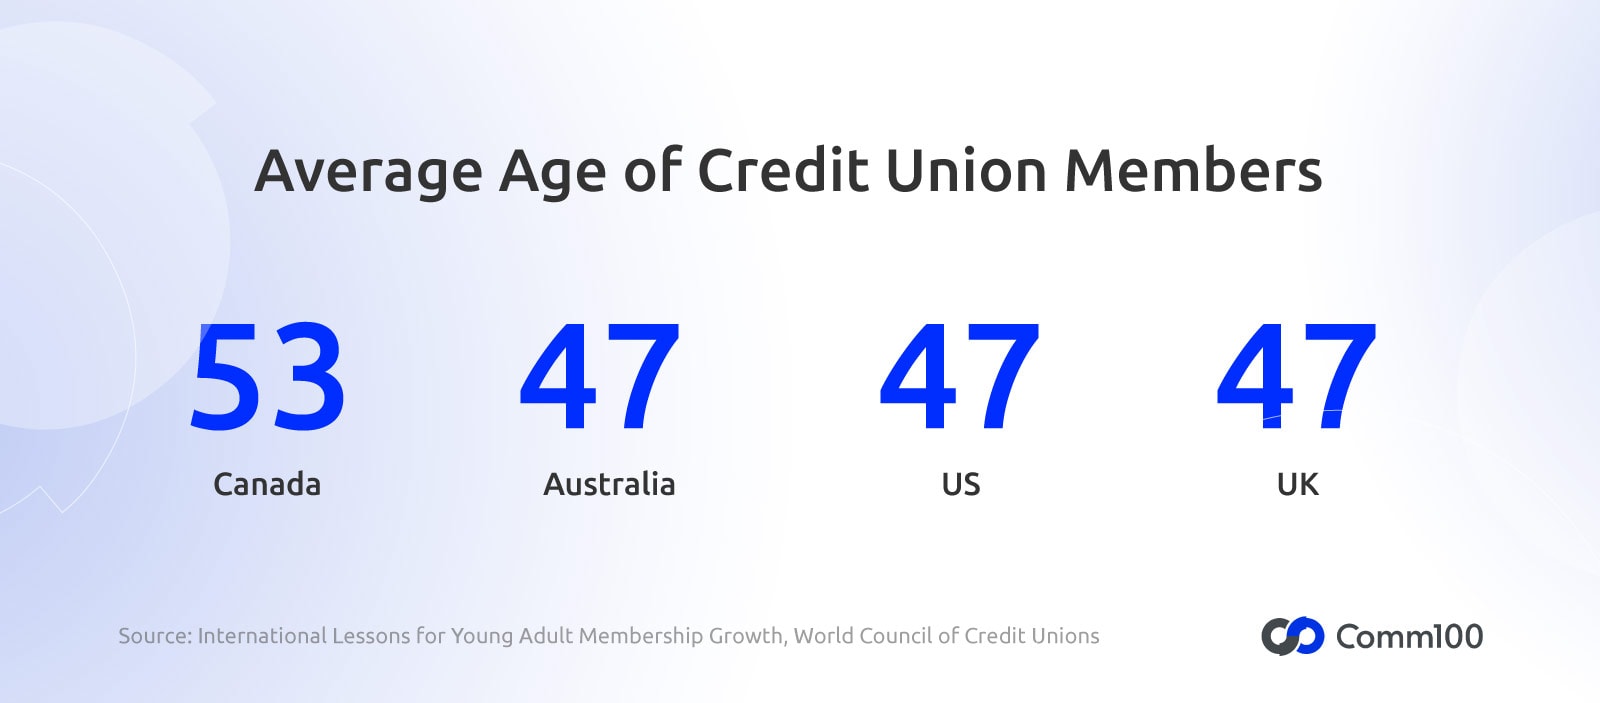 How to Improve Credit Union Member Engagement